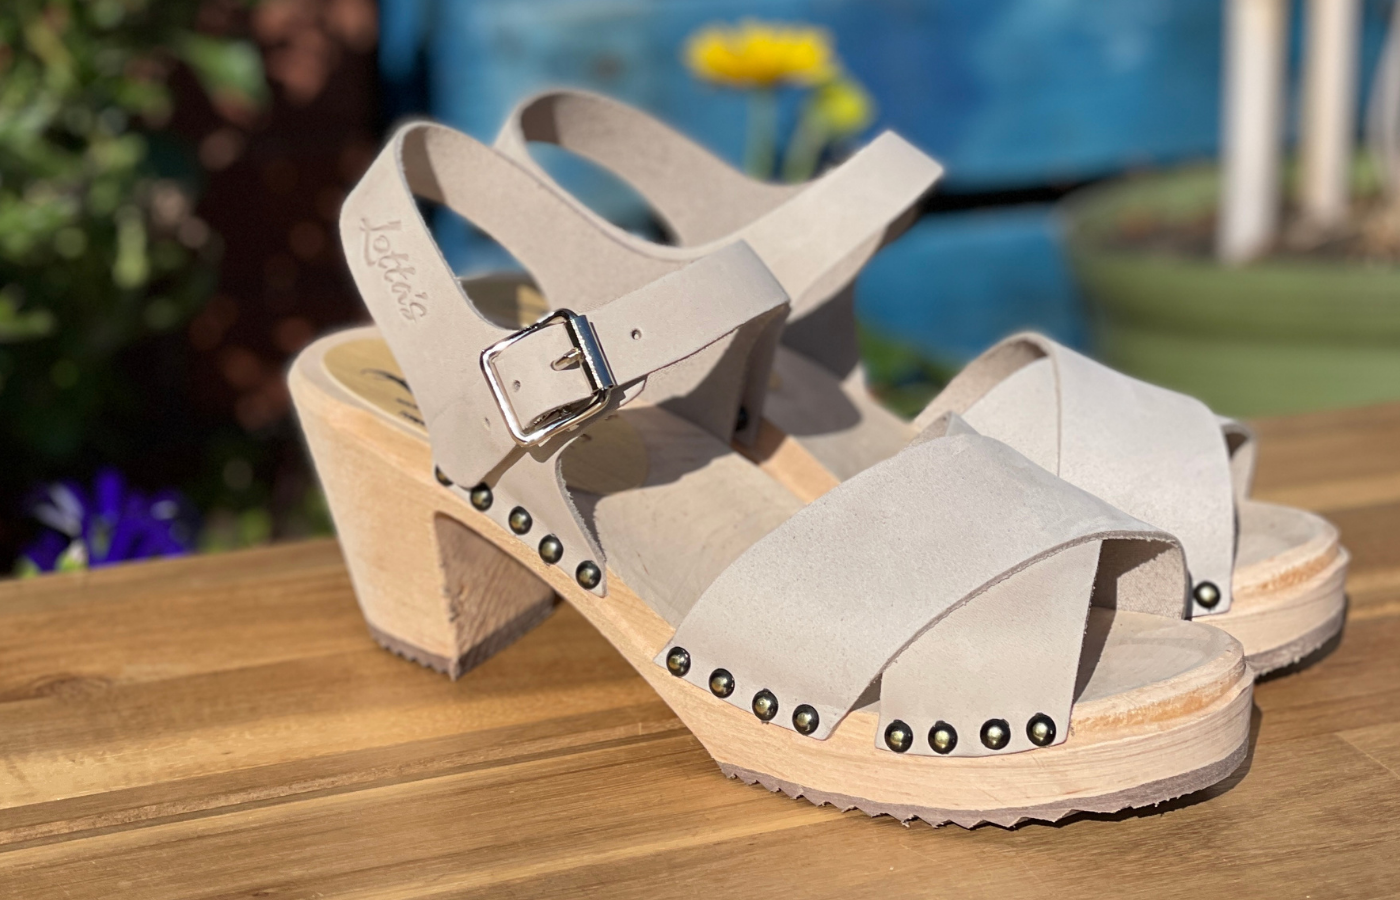 High heeled clogs for Spring 2022, Oatmeal crossover with studs